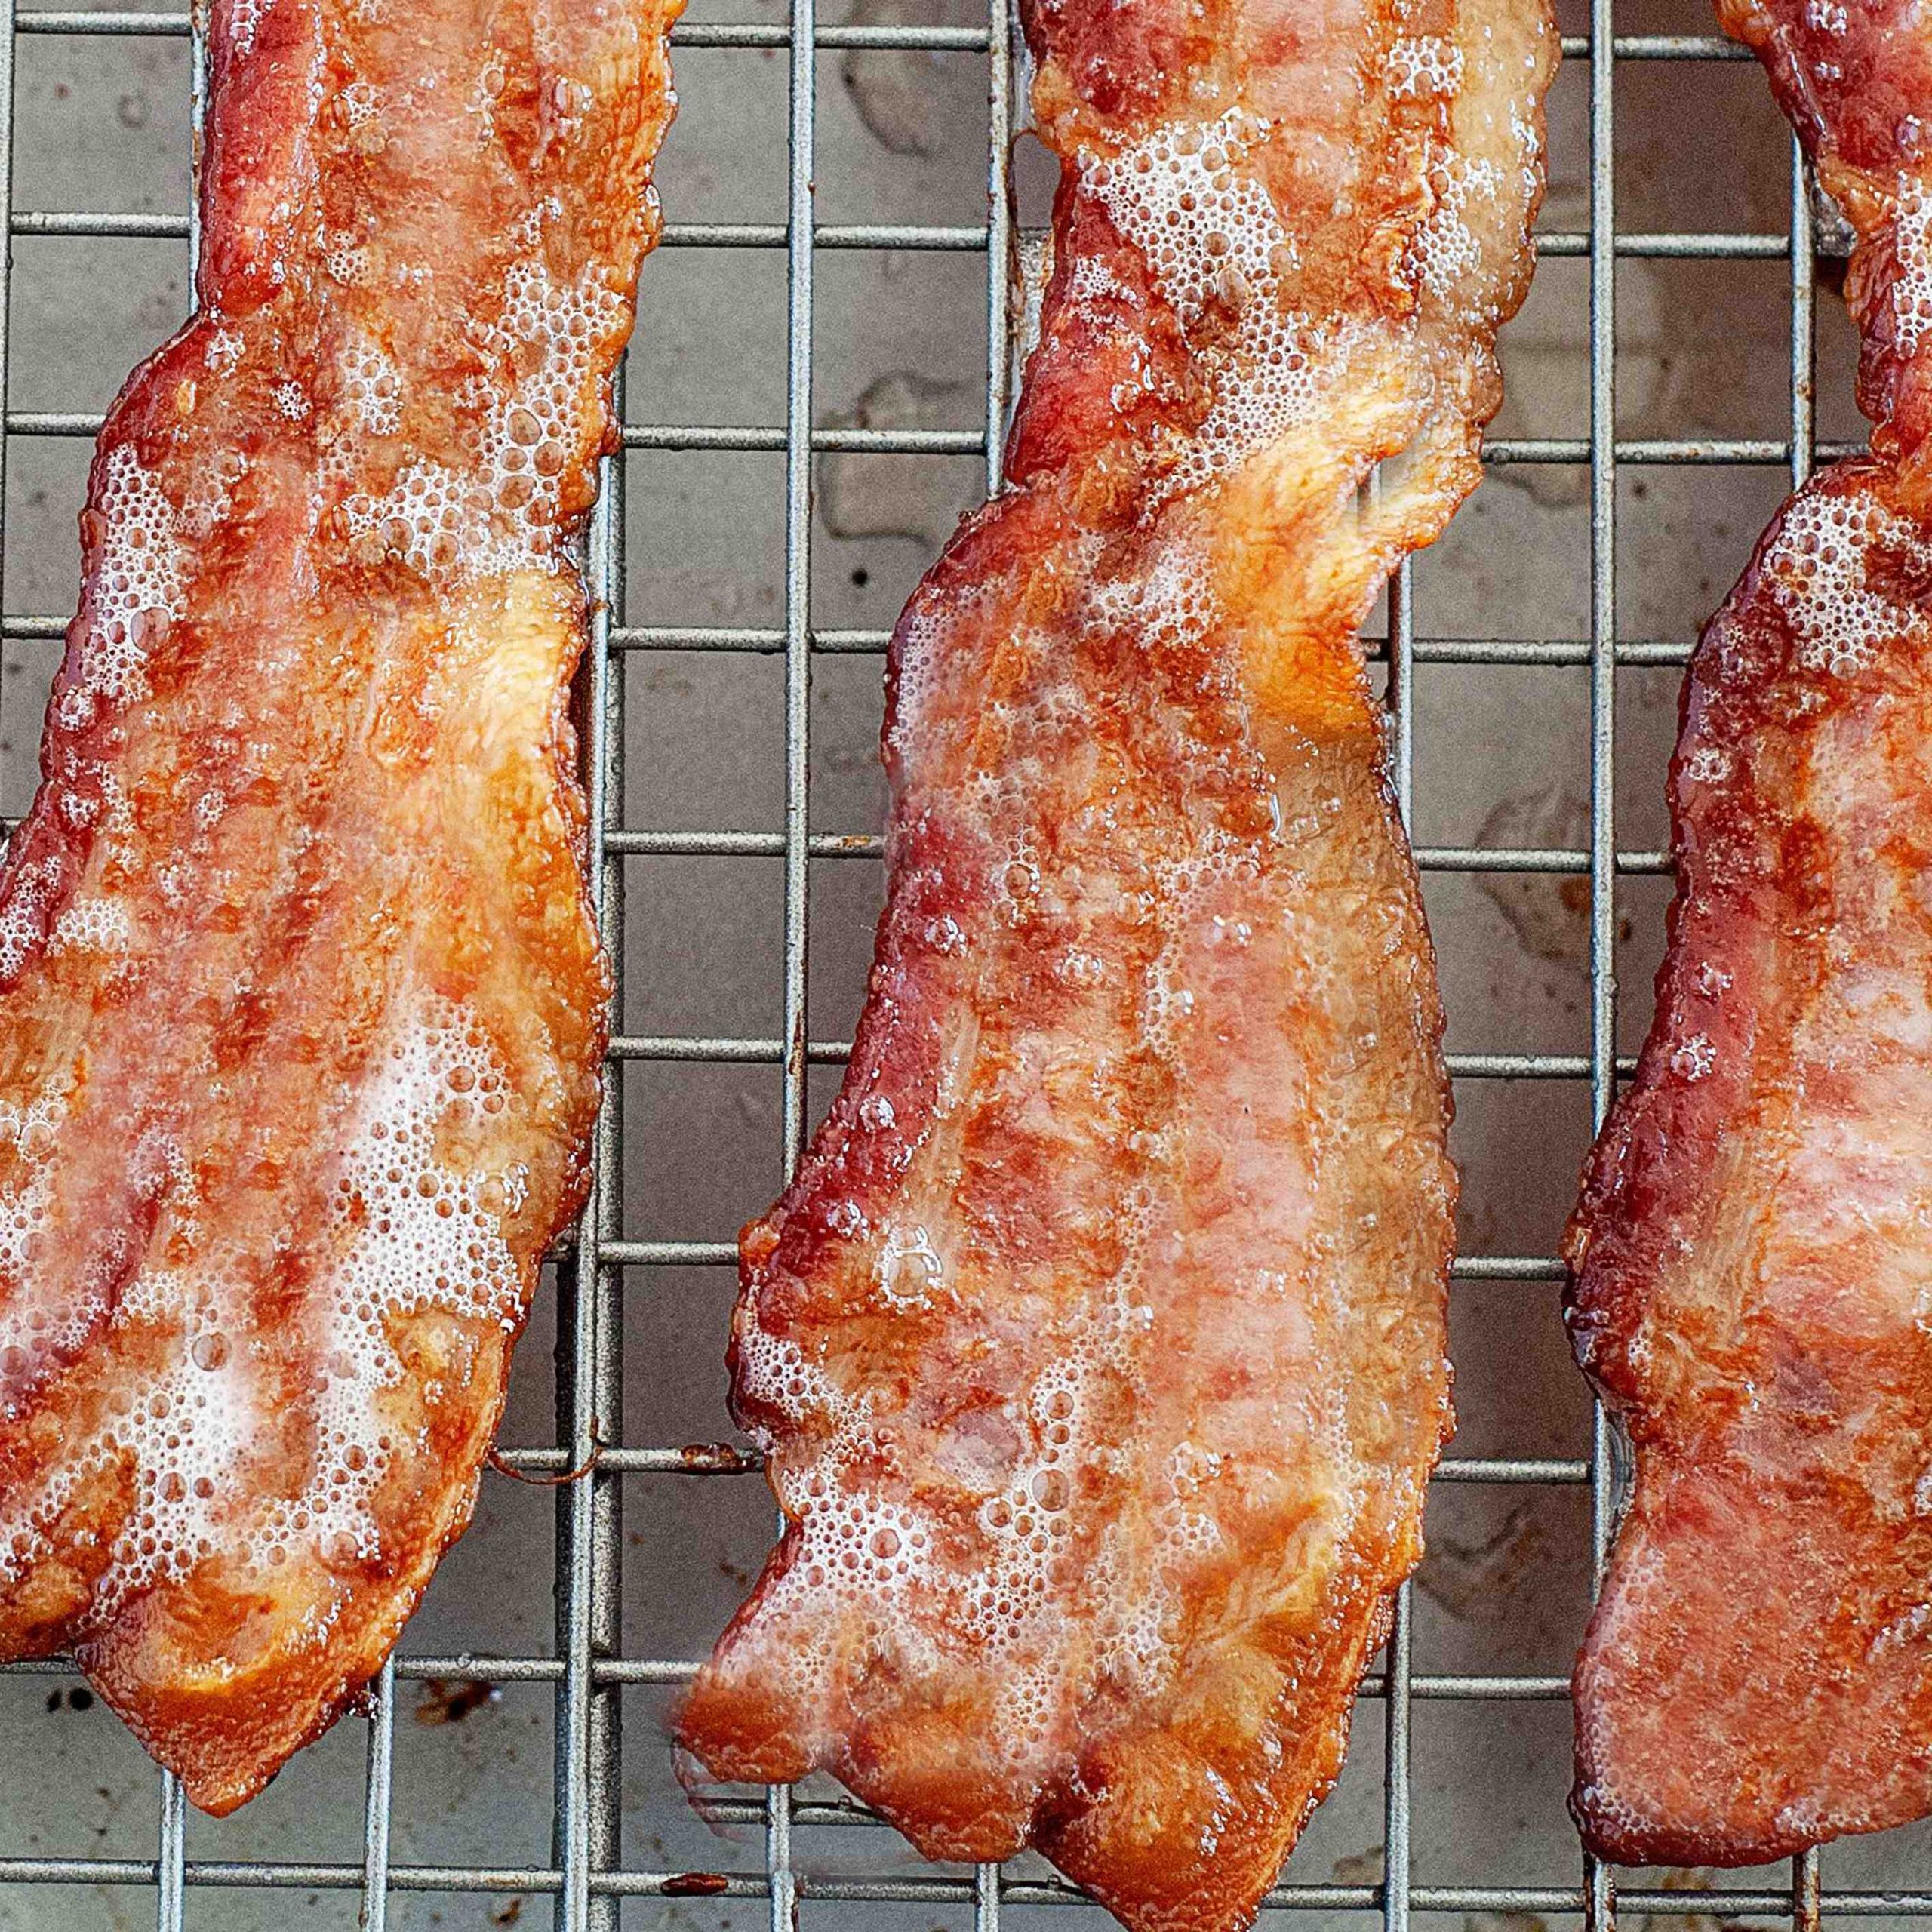 How do you make bacon on the stove?